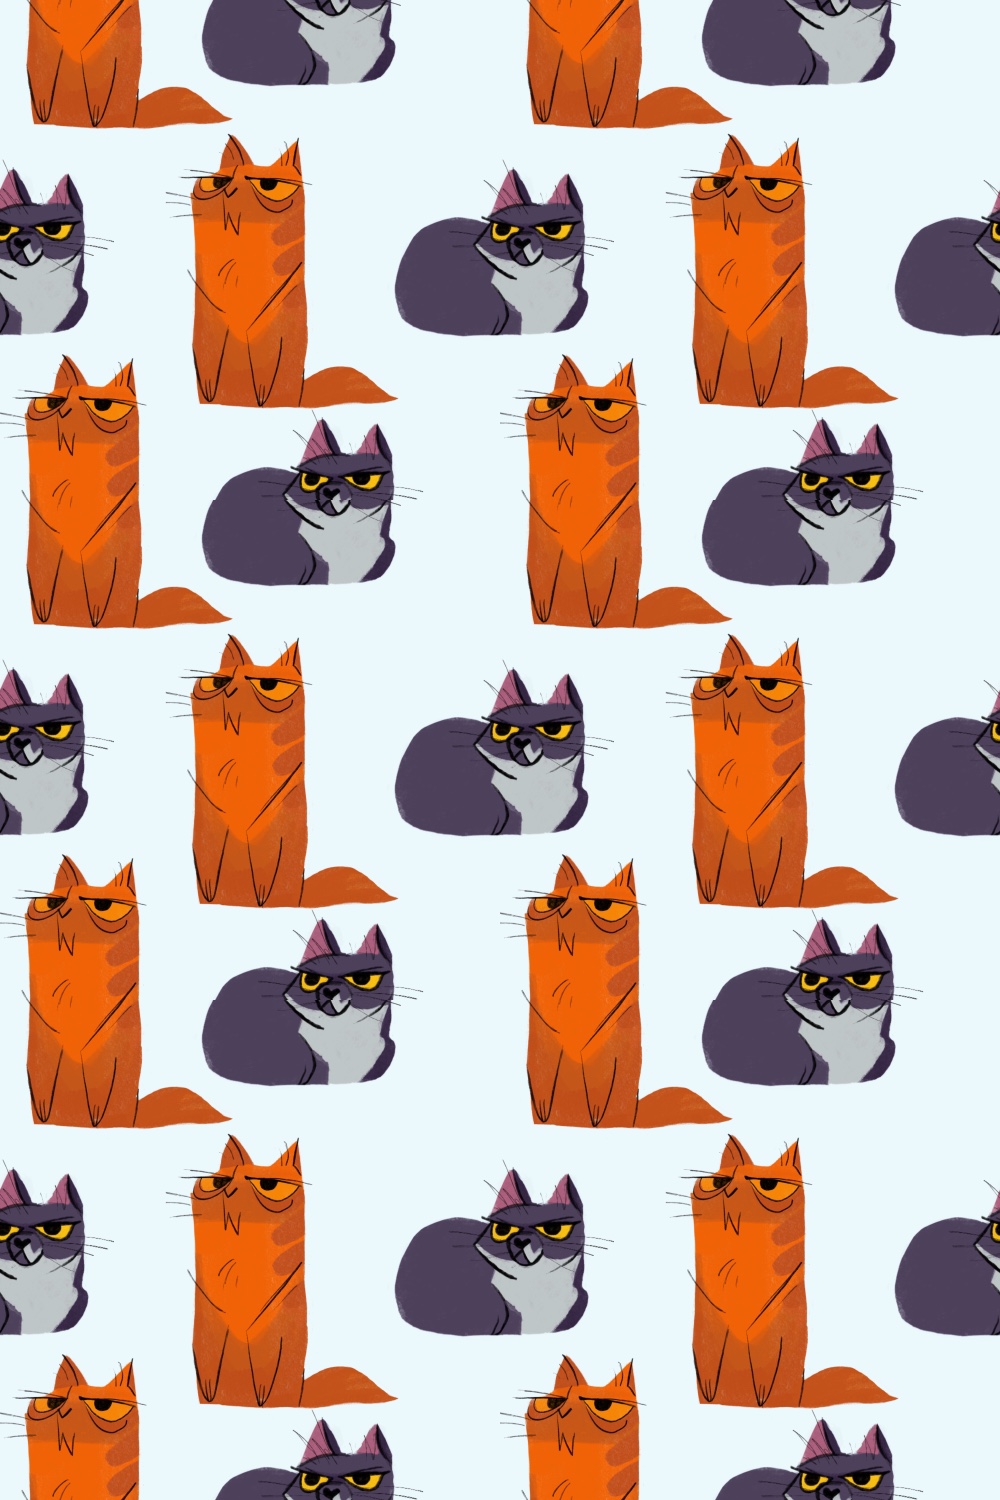 Set of 8 cats pattern pinterest preview image.